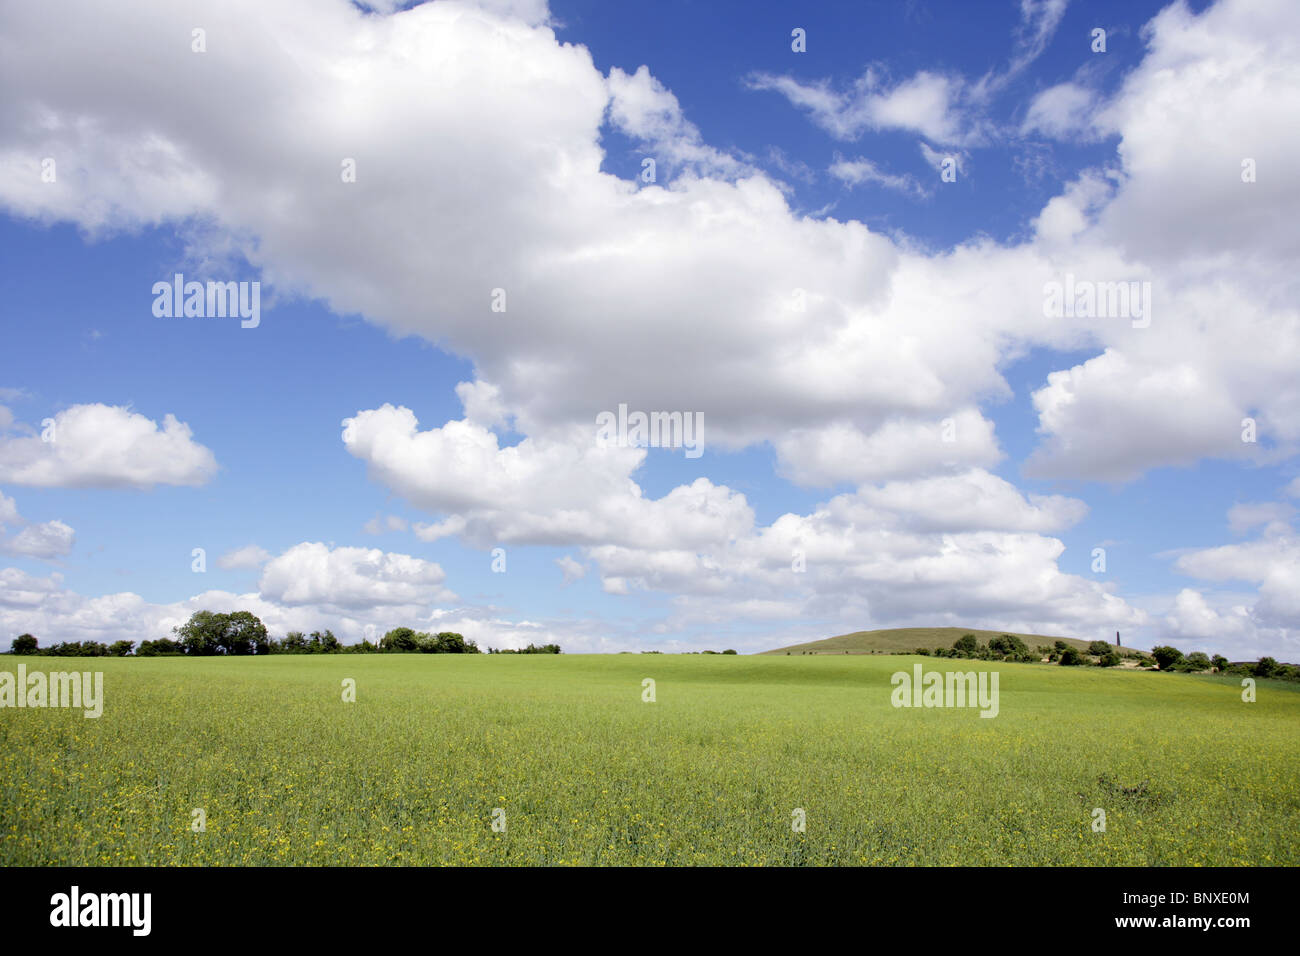 Summer fields near Calne Wiltshire with the obelisk known as the Lansdowne Monument in the distance. Stock Photo